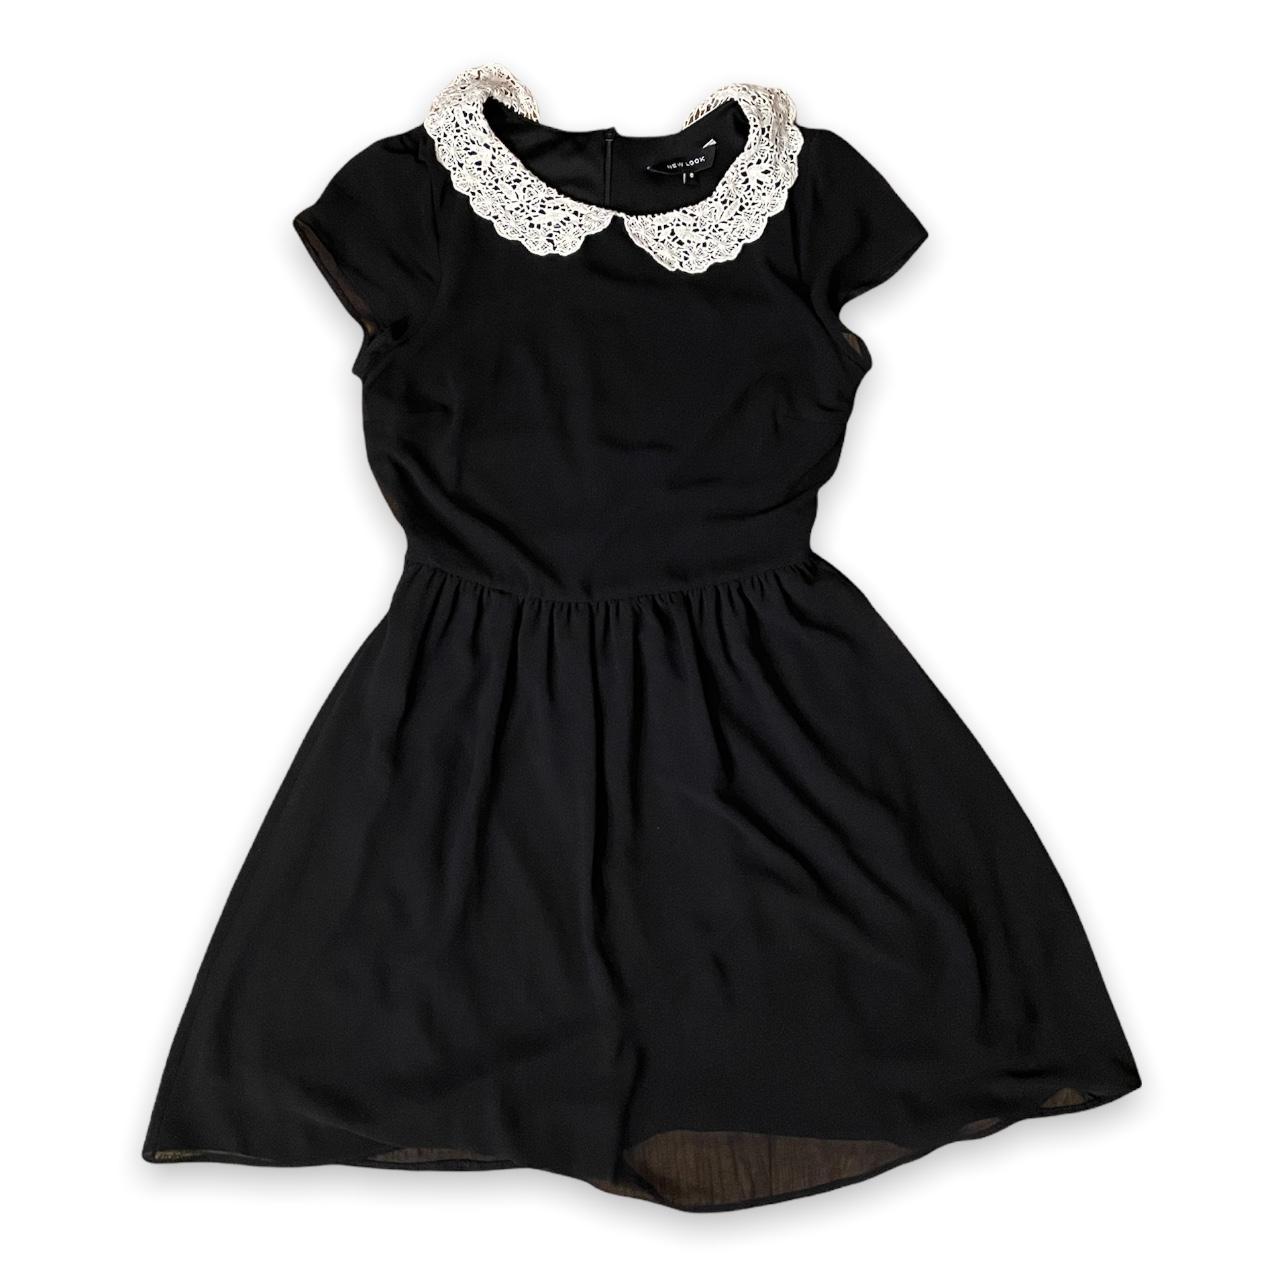 New Look Women's Black and White Dress